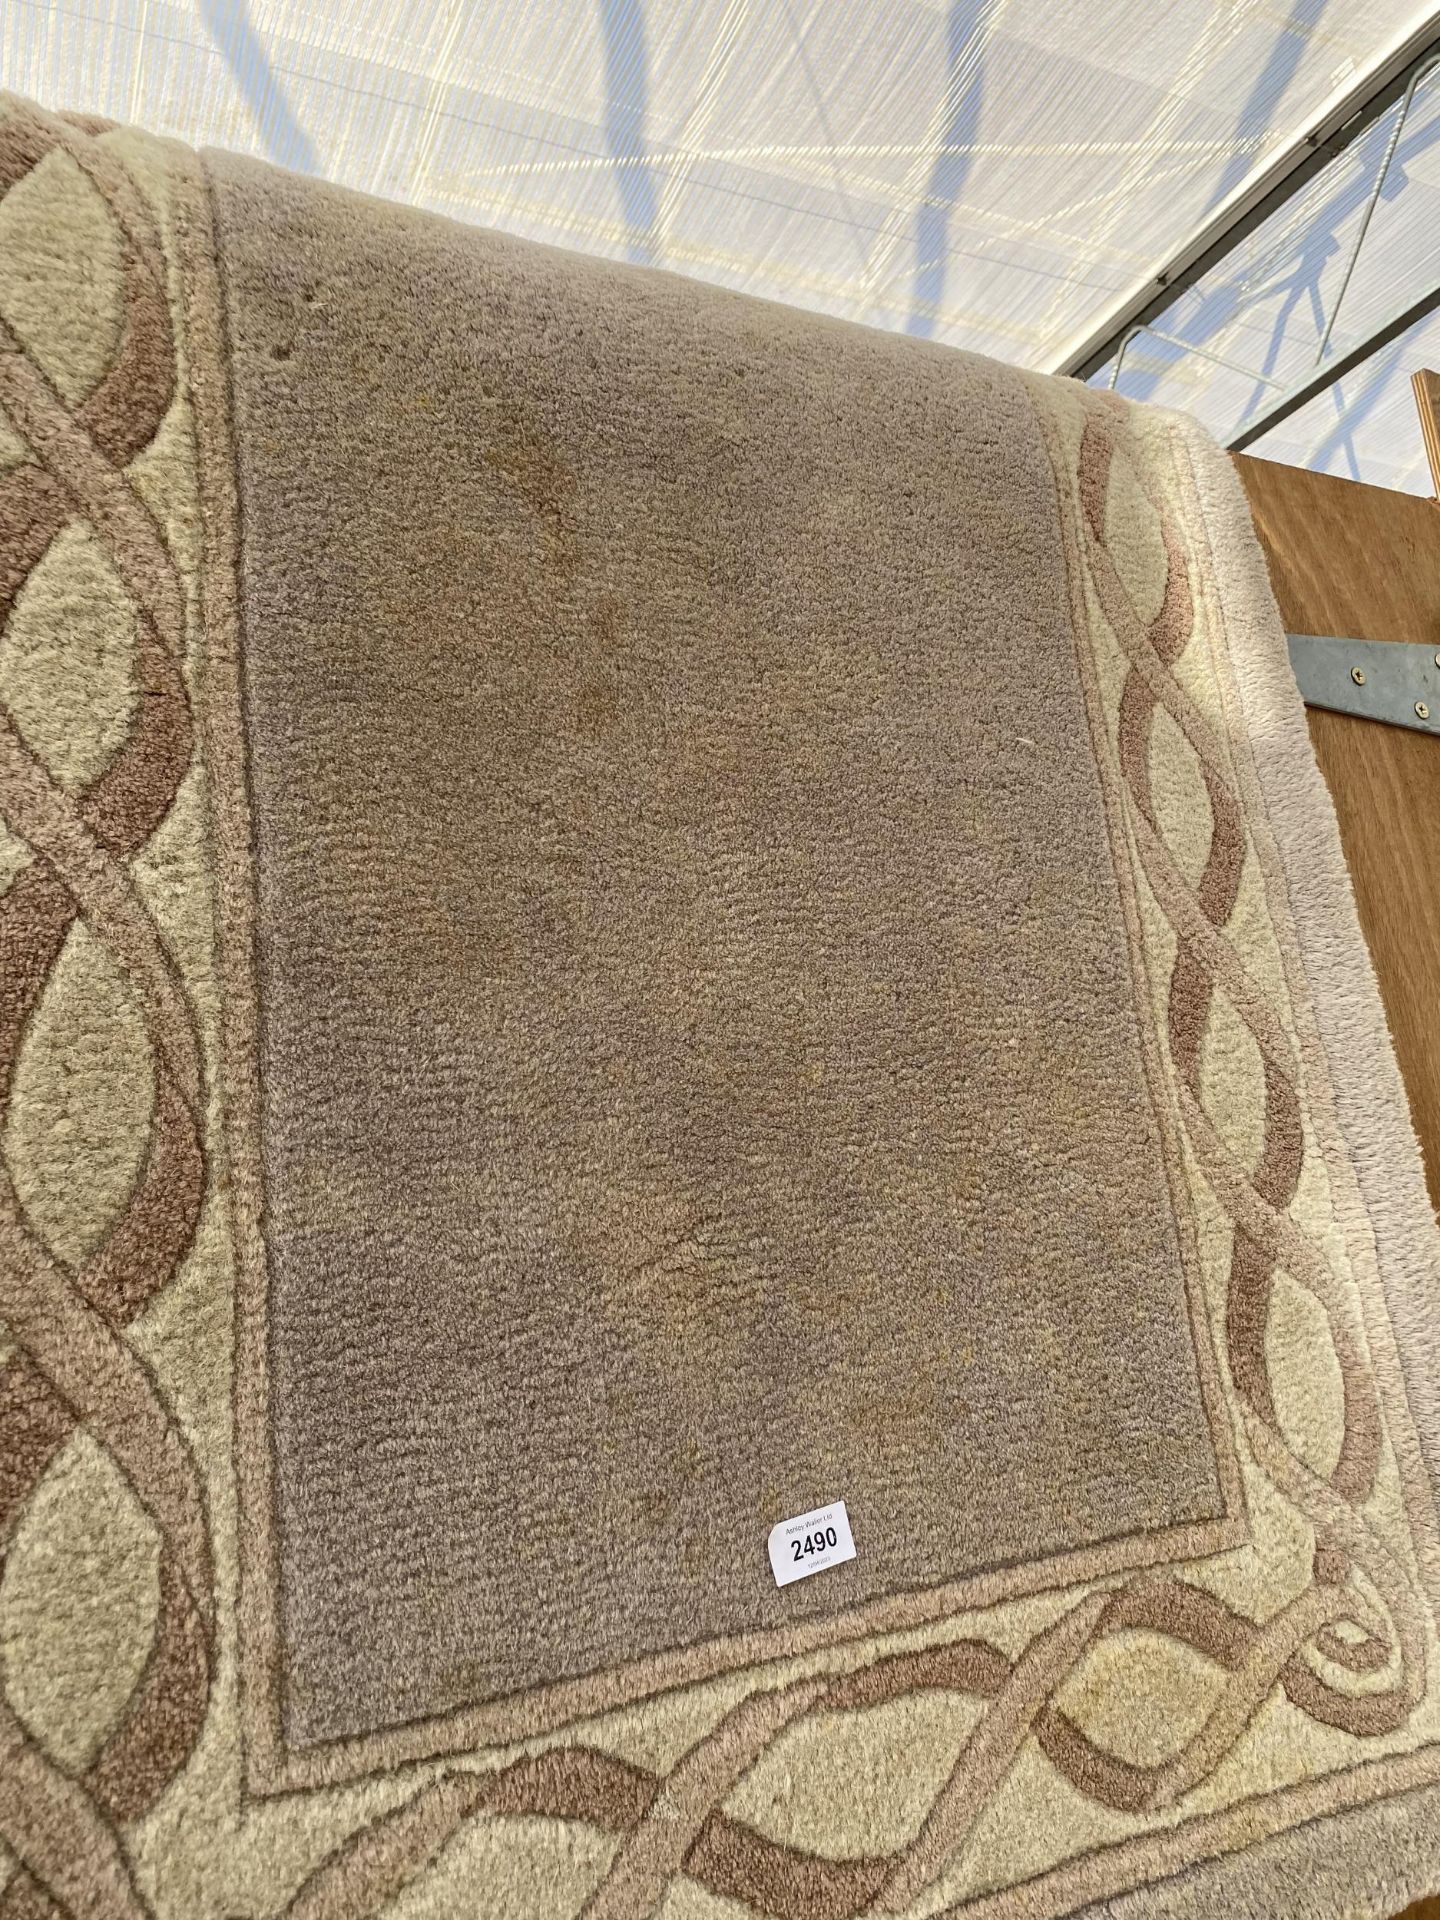 A SMALL CREAM PATTERNED RUG - Image 2 of 2